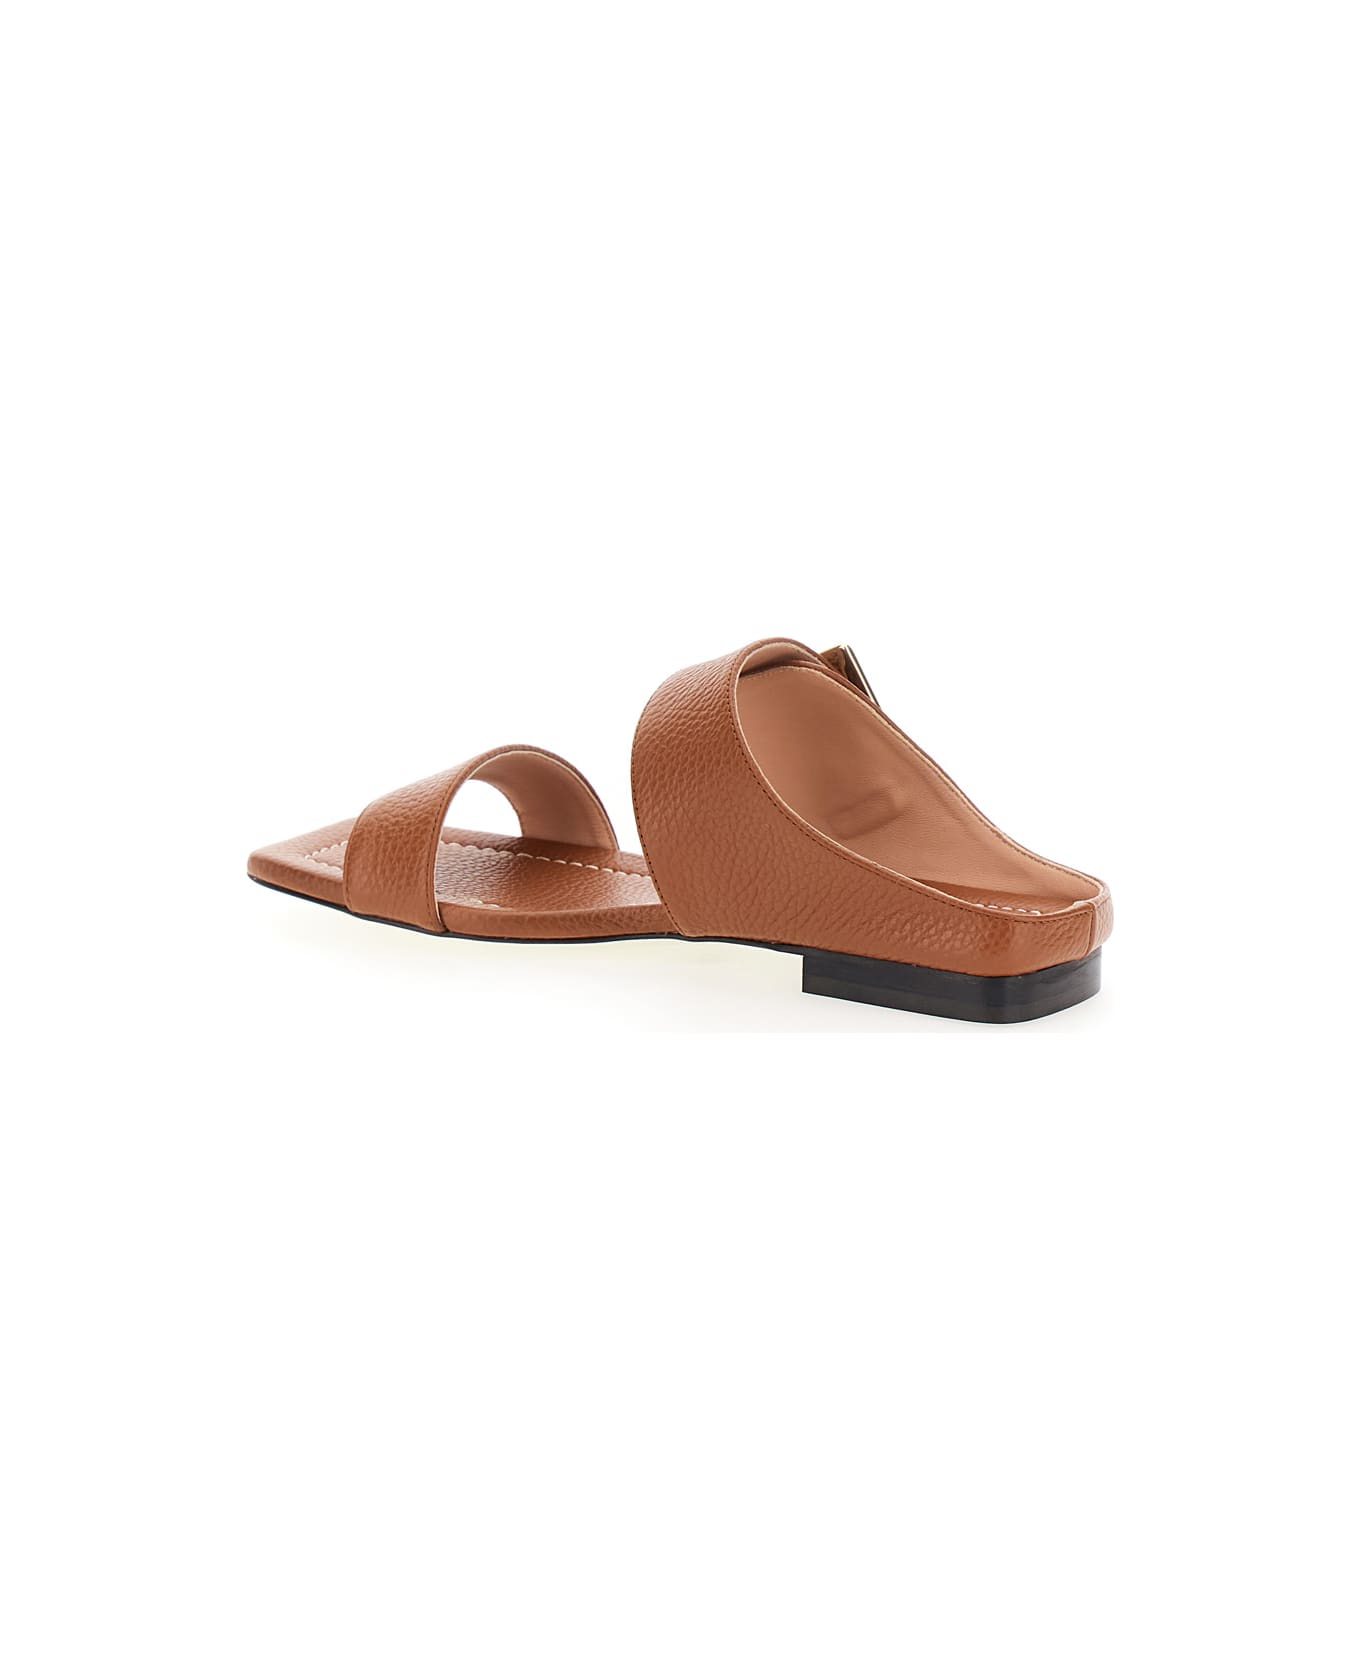 Pollini Brown Sandals With Maxi Buckle In Leather Woman - Brown サンダル